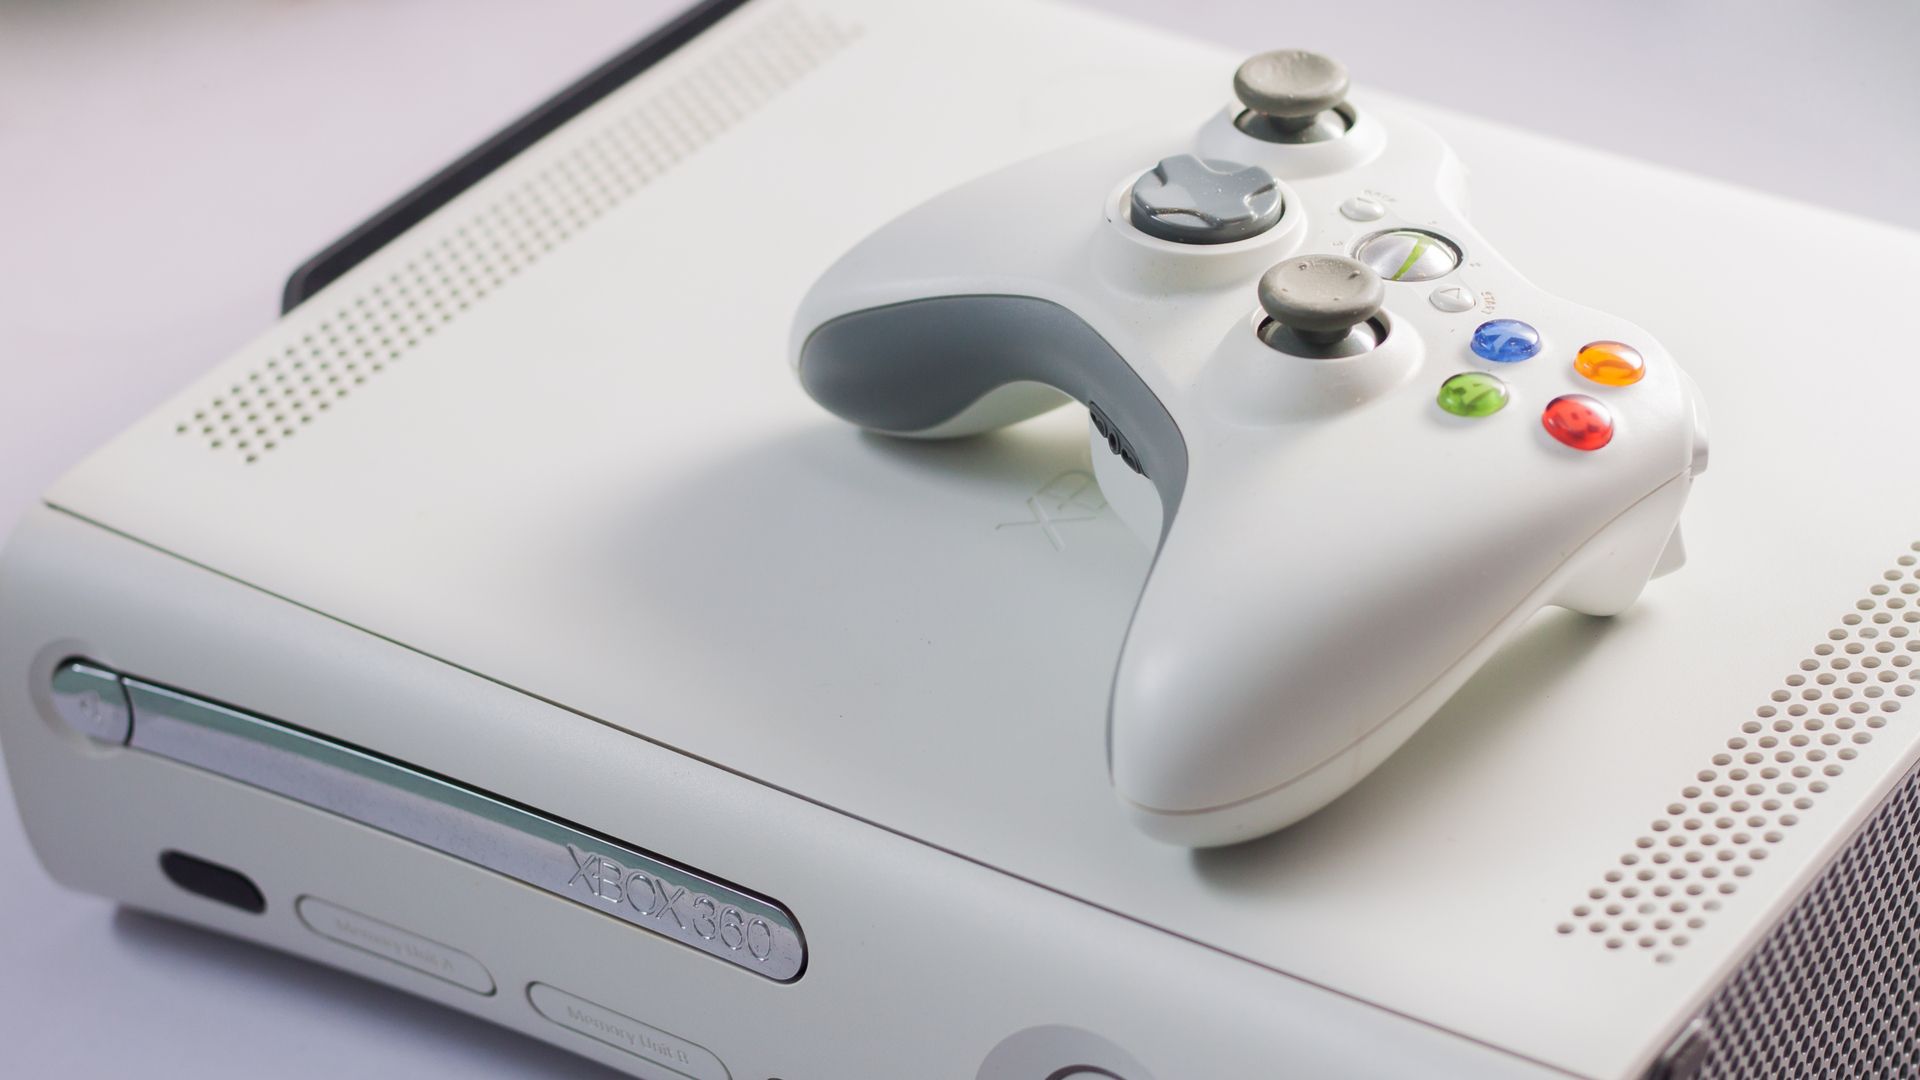 Microsoft is Shutting Down the Xbox 360 Store